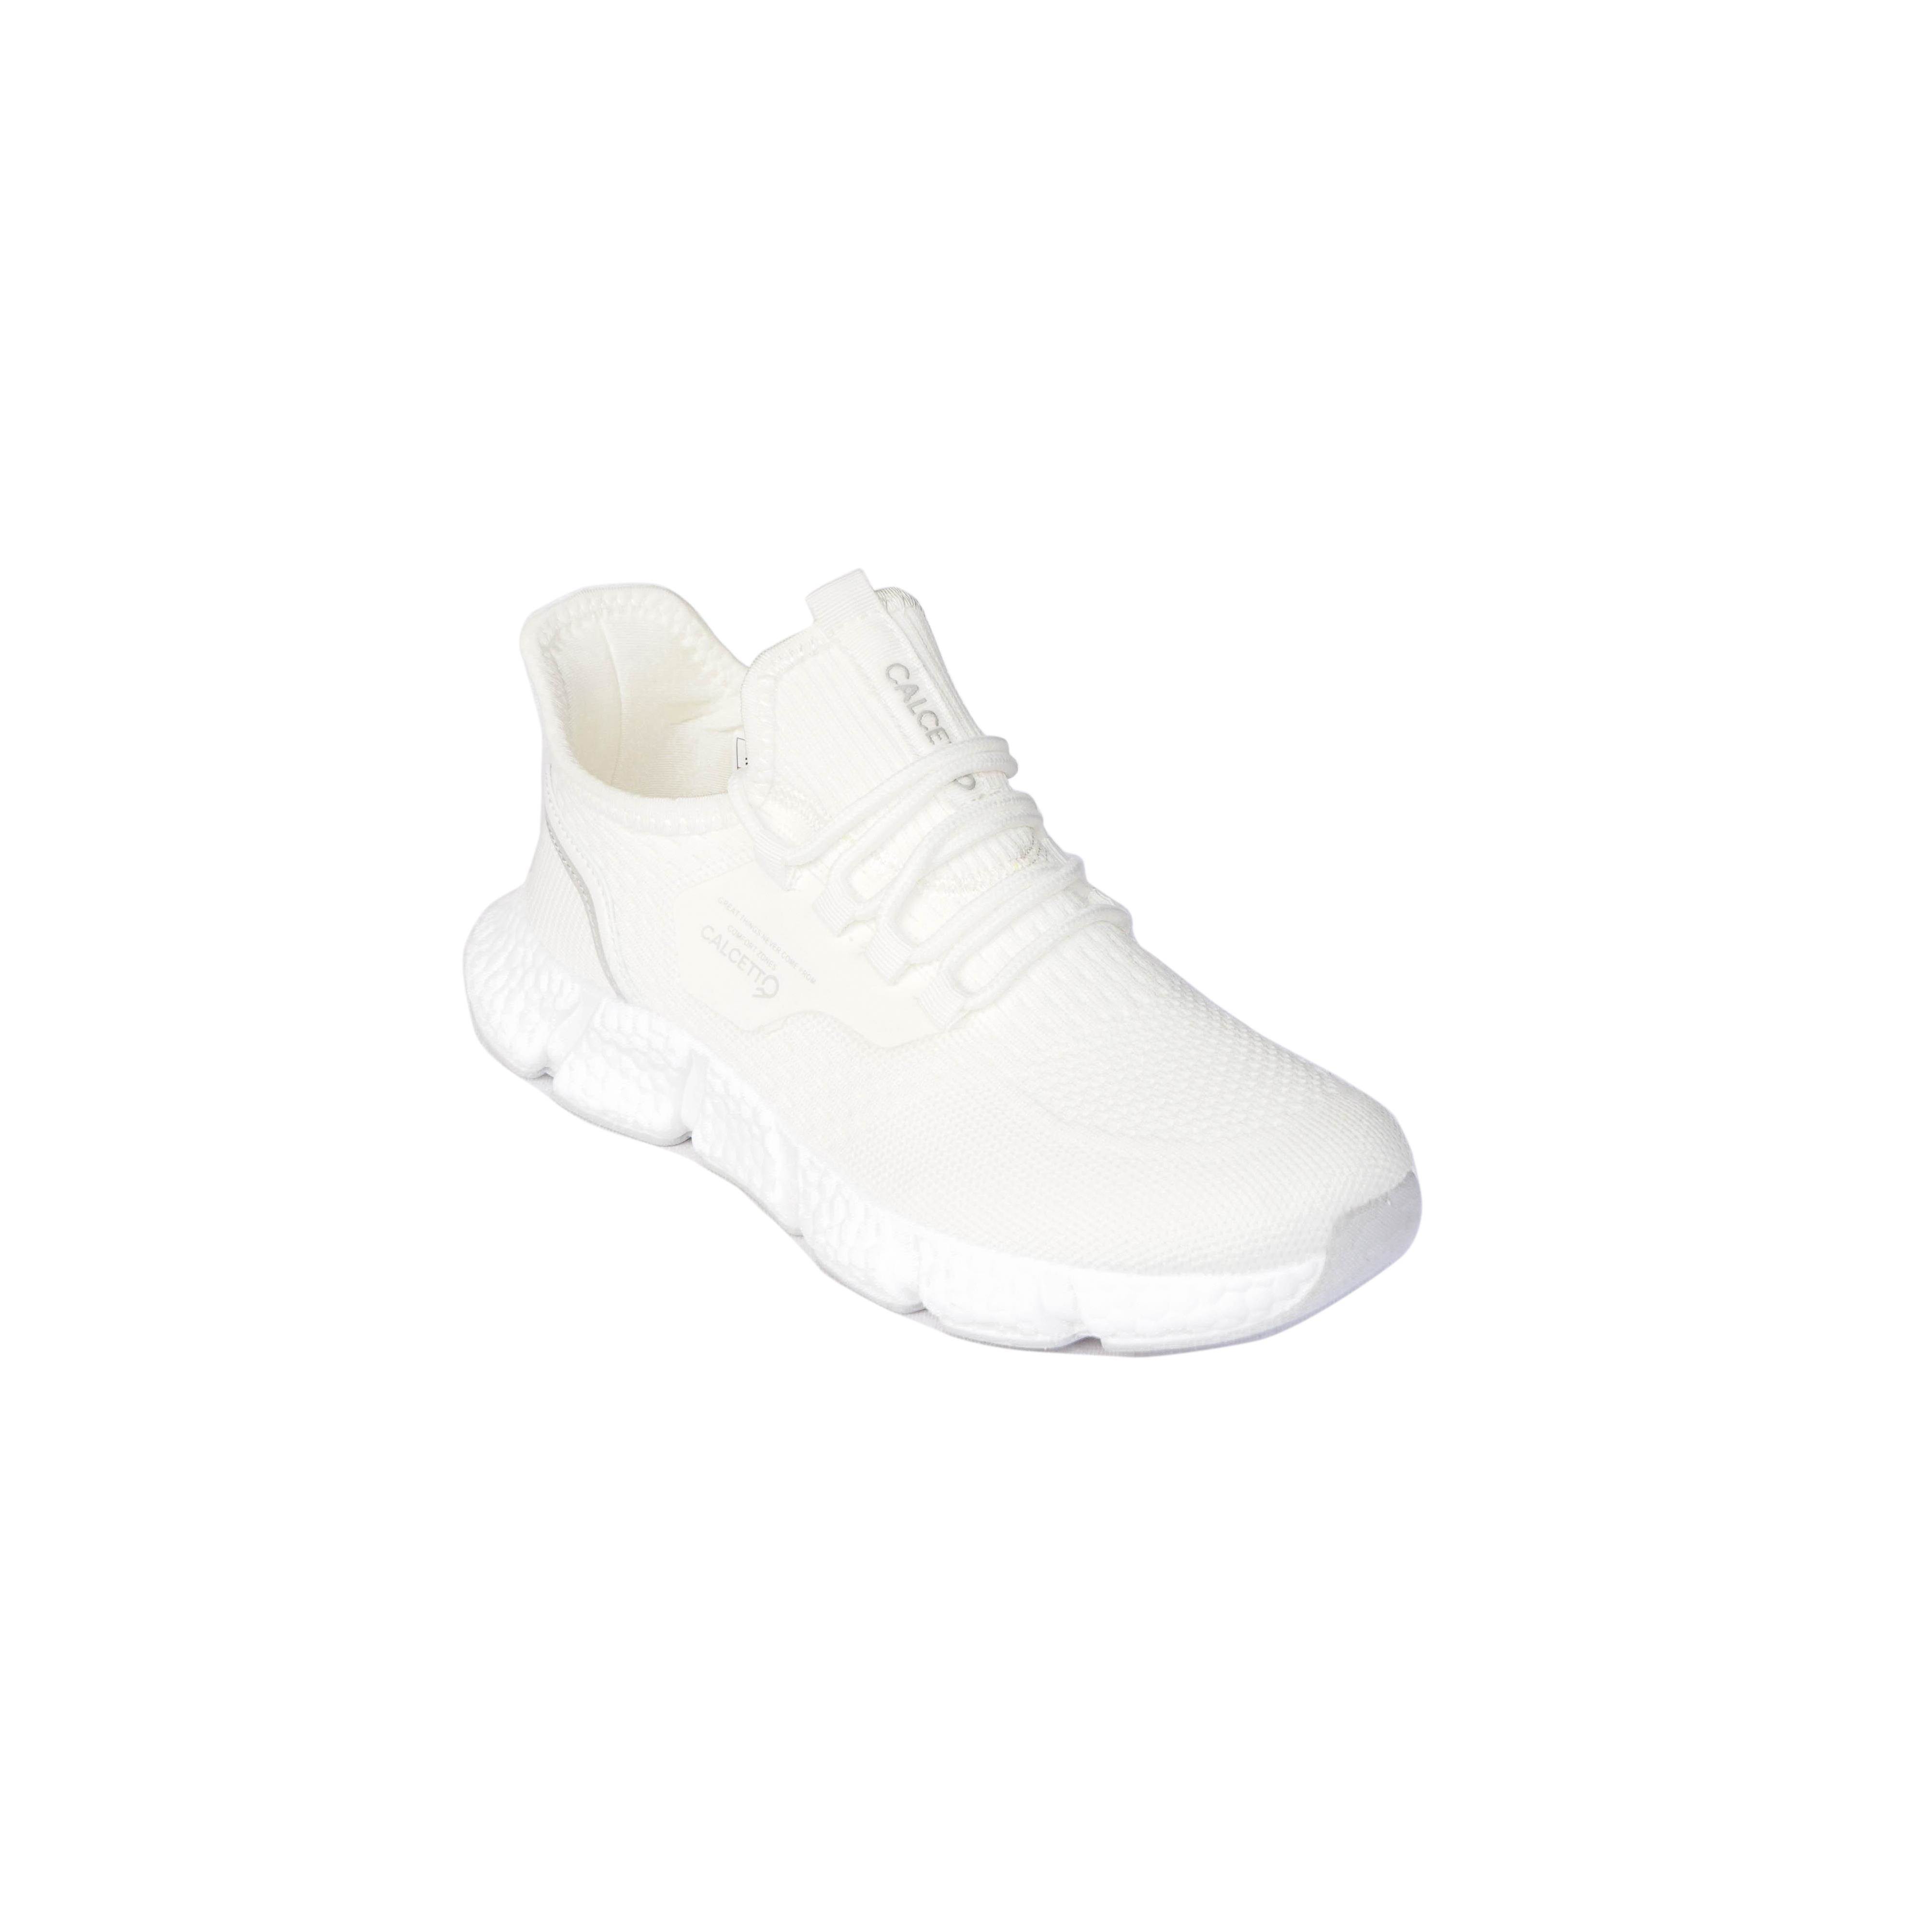 PARAGON Mens Solid White Sports Sneakers | Stylish, Comfortable and  lightweight slip-on Sneakers for Men | White | 205532